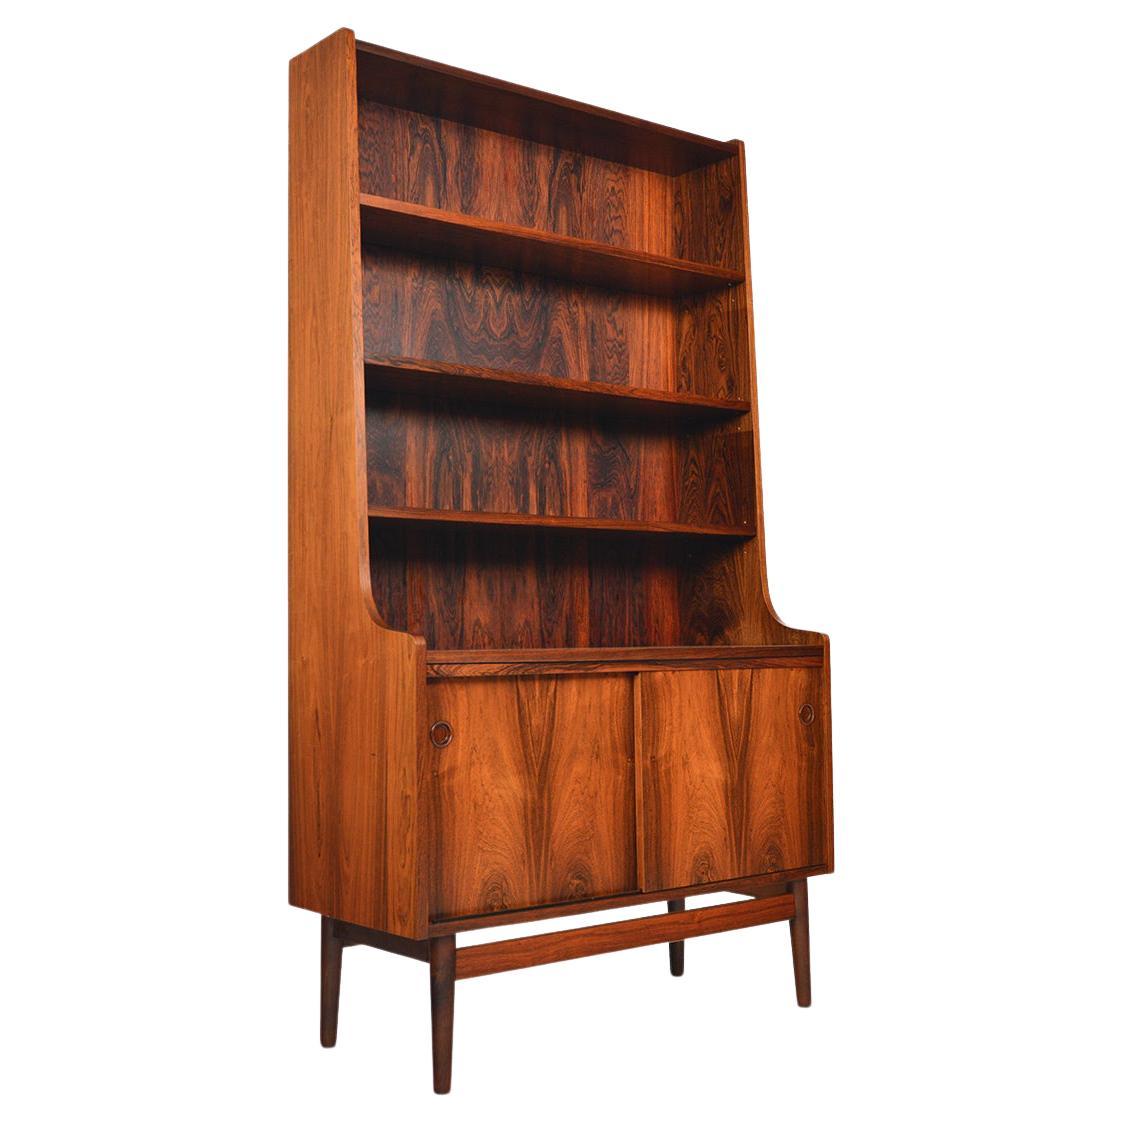 Johannes Sorth Rosewood Bookcase #1 For Sale